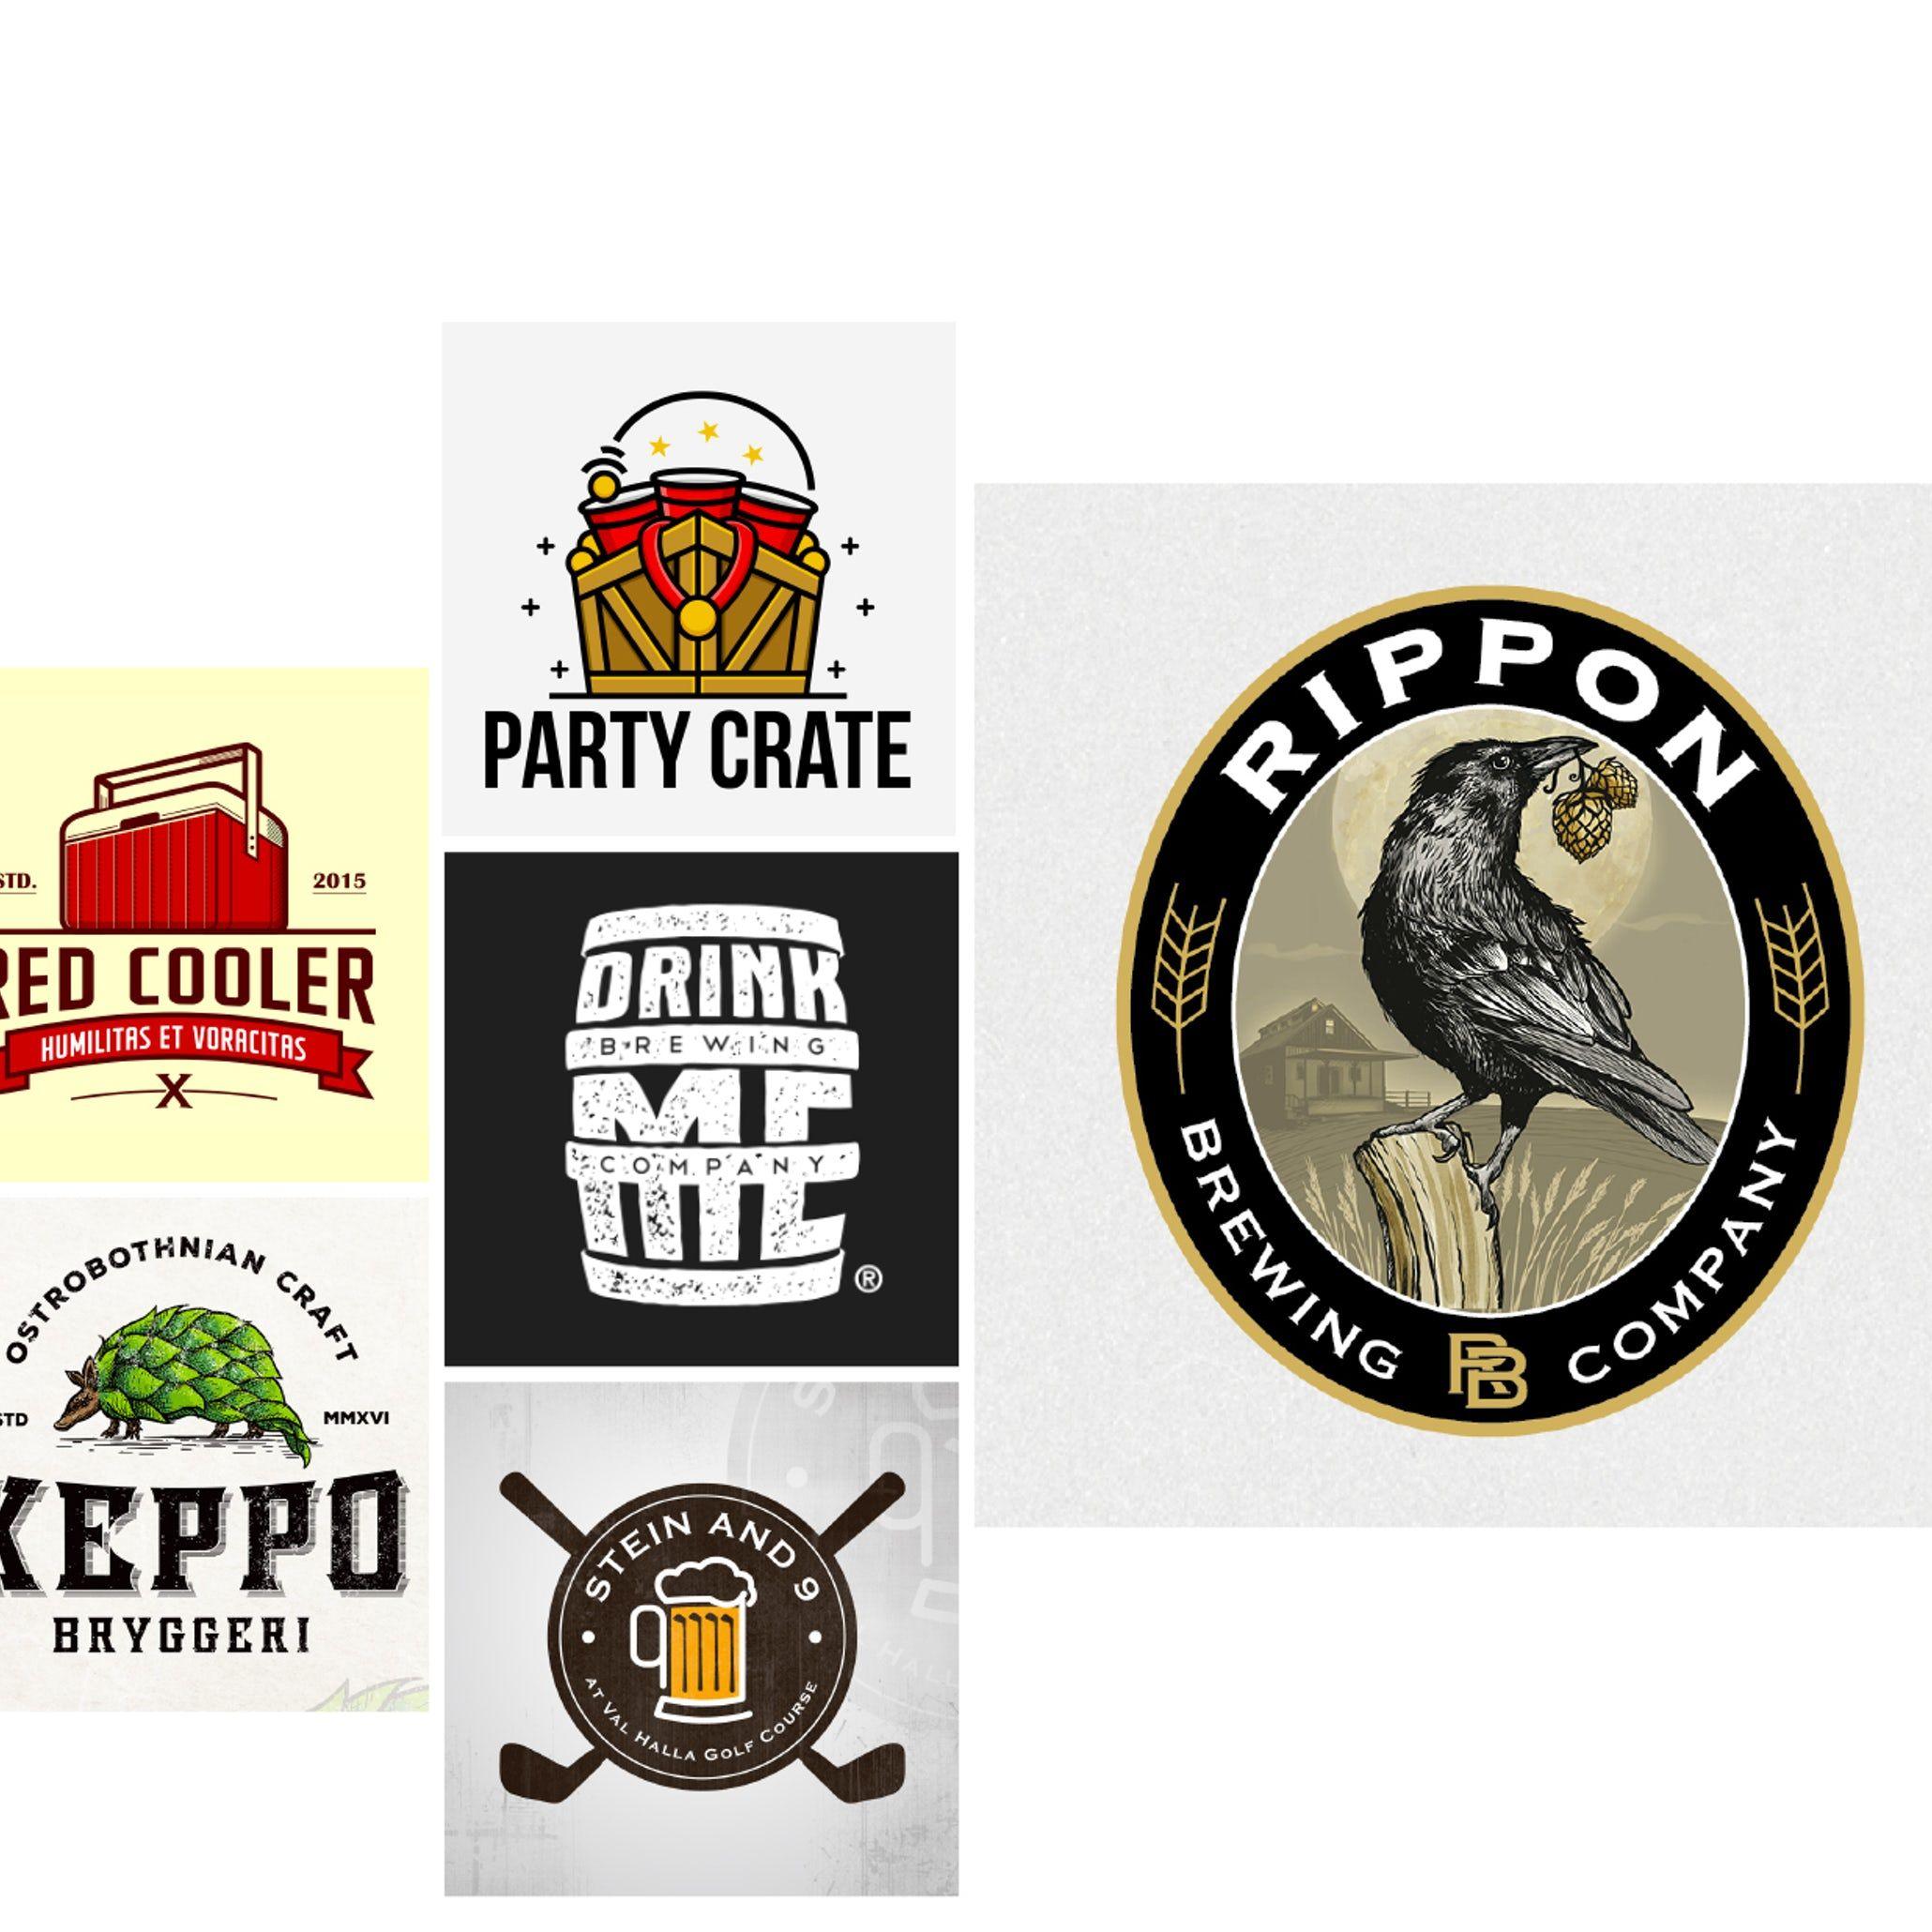 Microbrewery Logo - 47 beer and brewery logos to drink in - 99designs